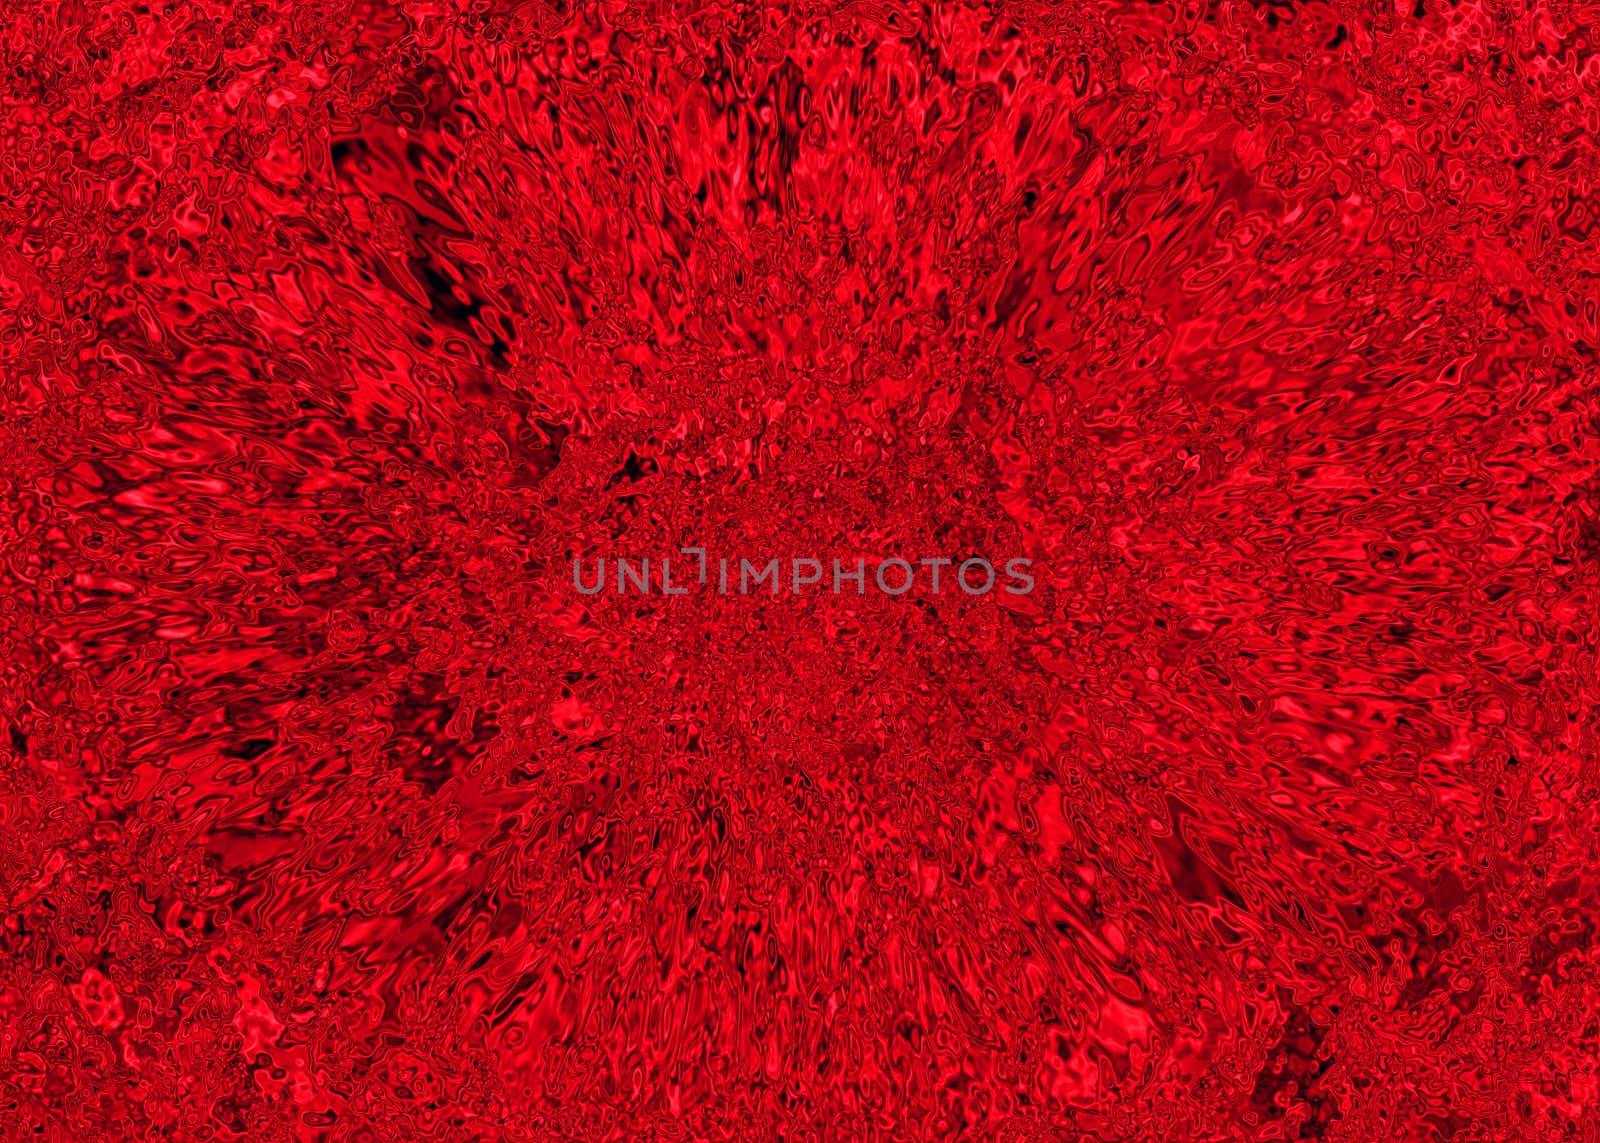 Red abstract distorted textured background by DamantisZ